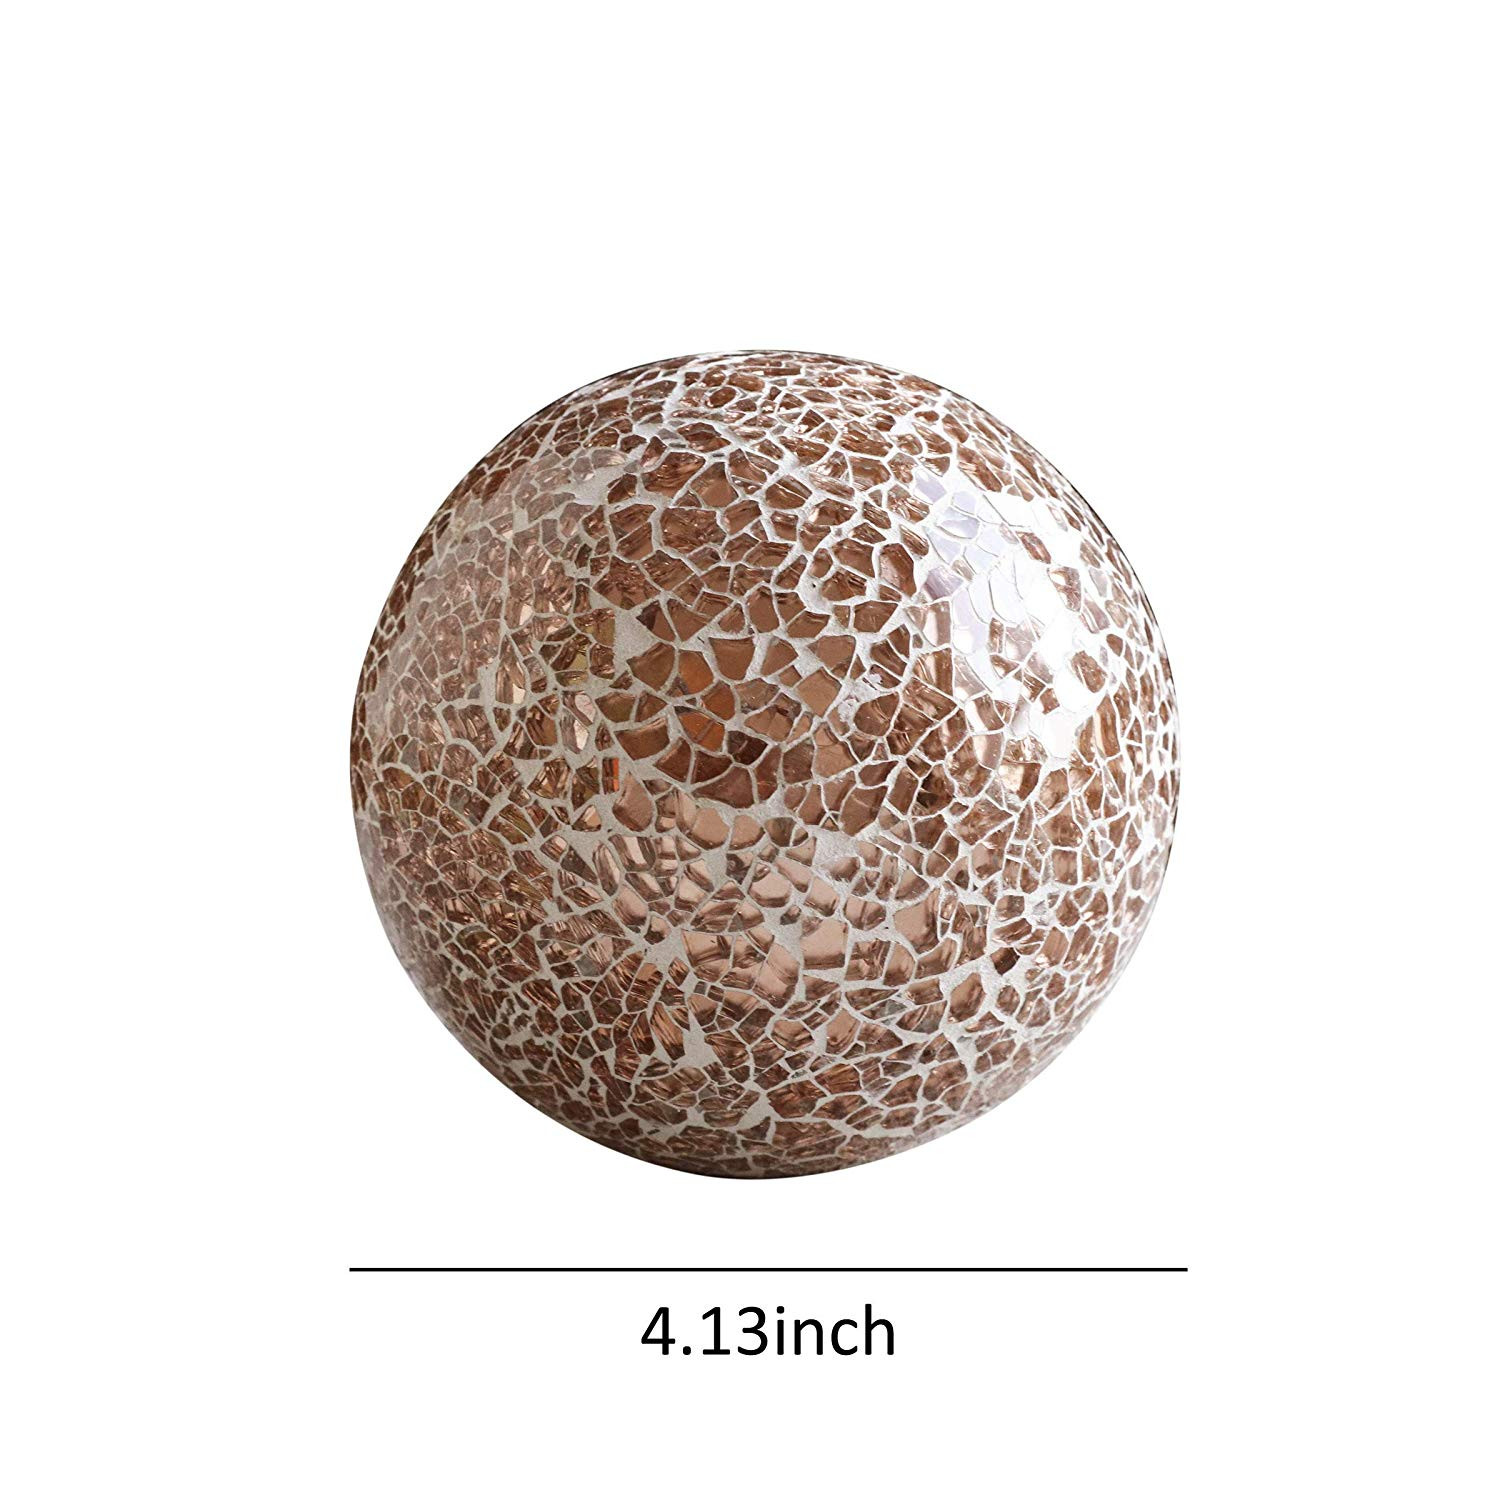 11 attractive Rose Gold Bowl Vase 2024 free download rose gold bowl vase of amazon com wh housewares decorative orbs set of 3 glass mosaic intended for amazon com wh housewares decorative orbs set of 3 glass mosaic sphere balls dia 4 rose gold